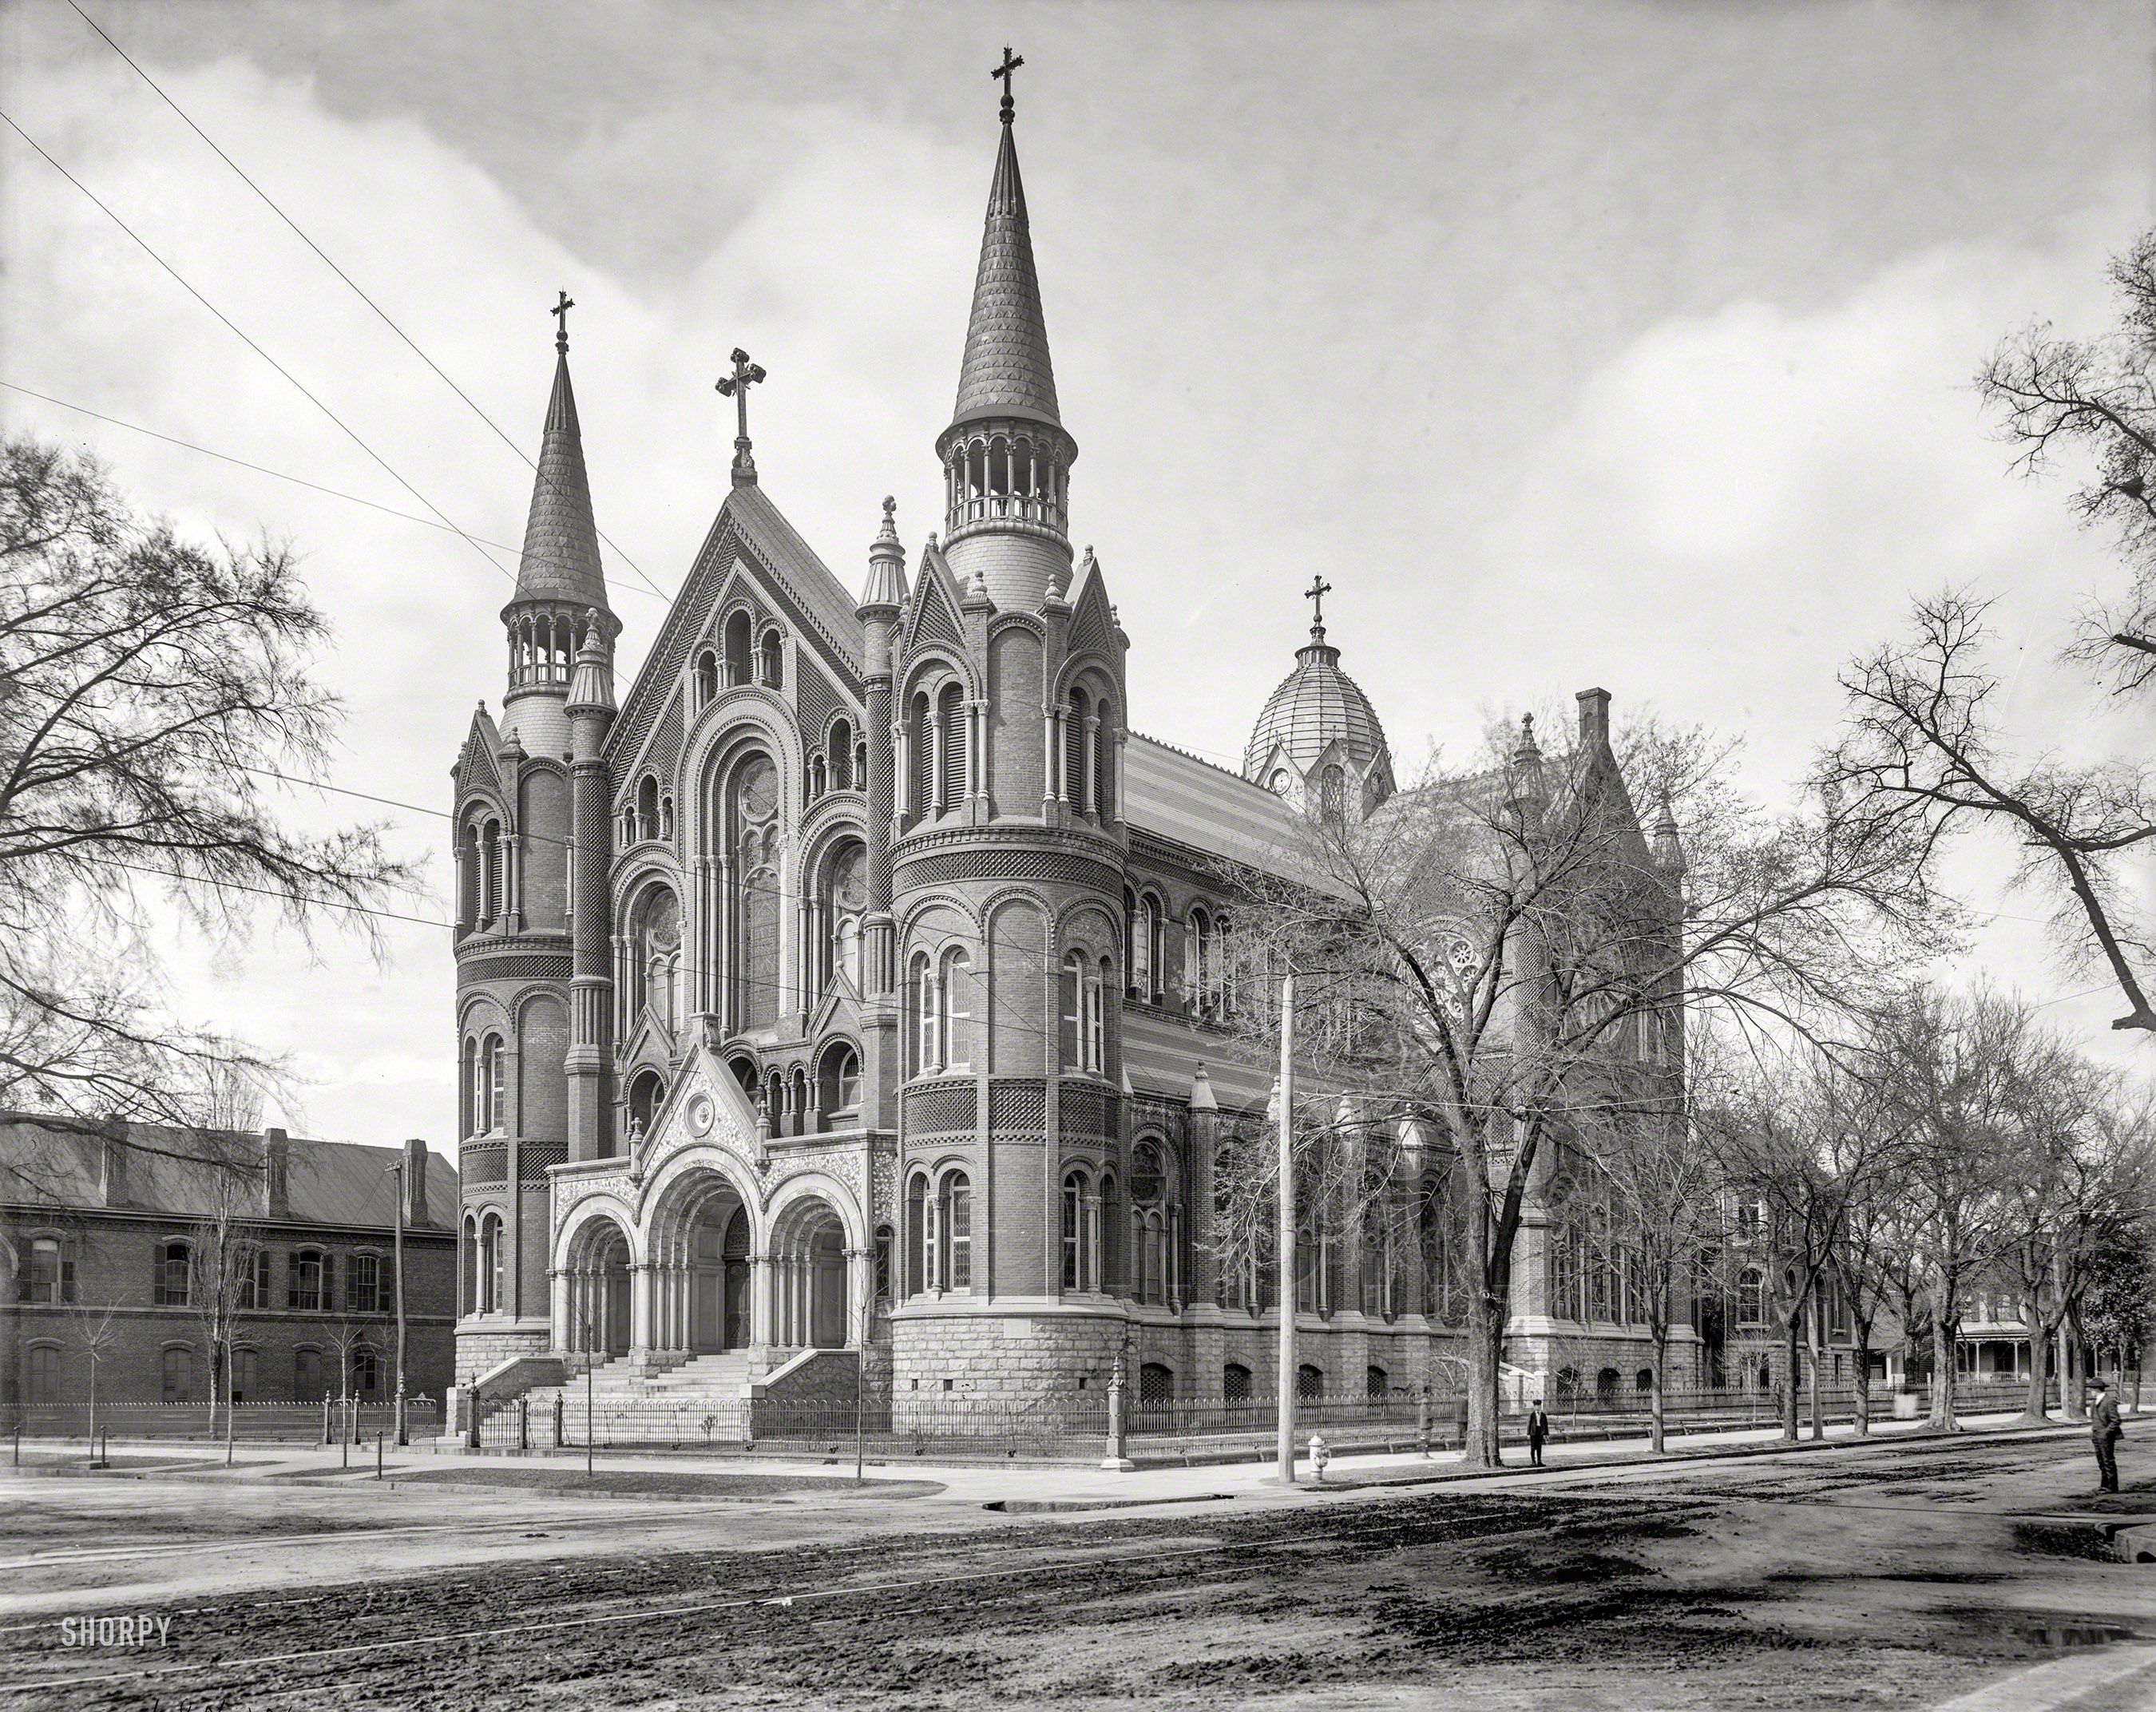 1905. "Church of the Sacred Heart, Augusta, Georgia." 8x10 inch dry plate glass negative, Detroit Publishing Company. View full size.